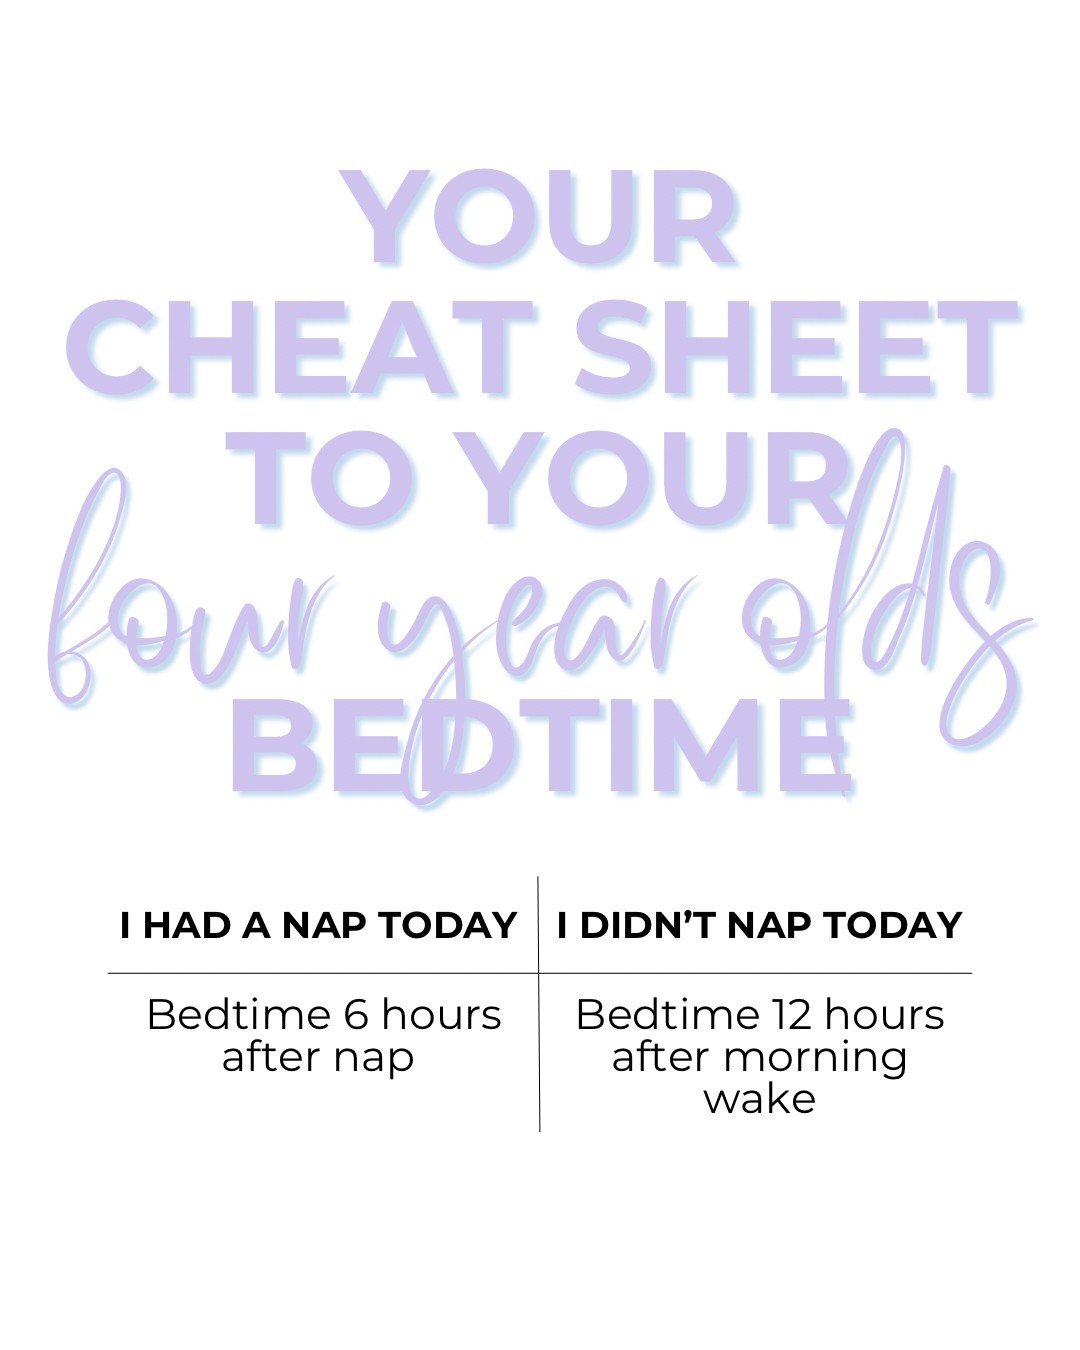 Your cheat sheet to a 4 year olds naps and bedtime 🤩
 
Are you in the stage where your 4 year old still takes a little nap, or sometimes takes one.... or maybe they have permanently transitioned to no nap at all??
 
No matter which stage you are at 